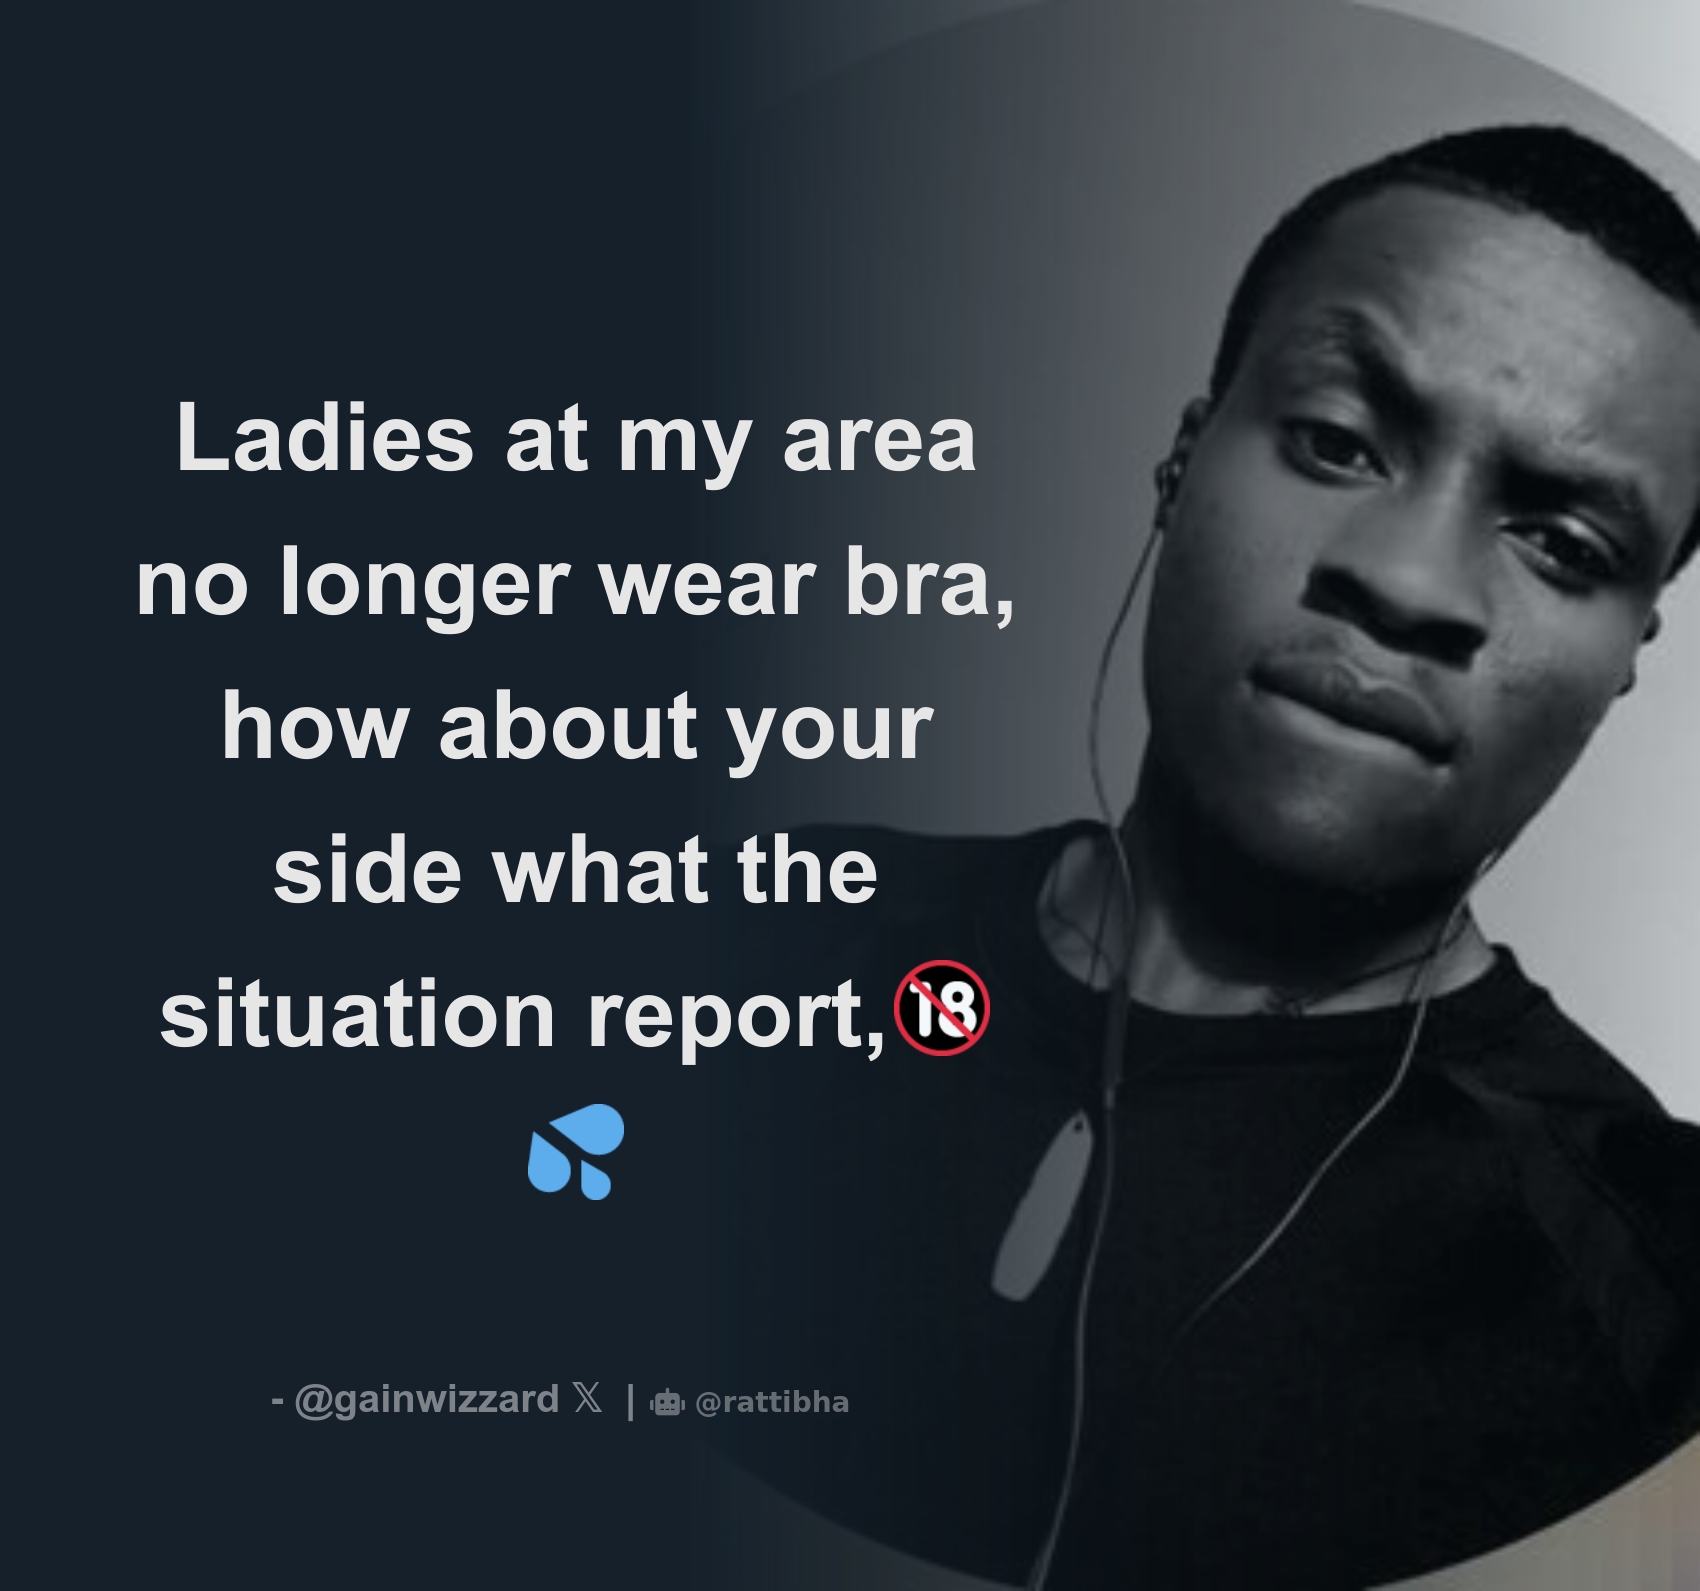 Ladies at my area no longer wear bra, how about your side what the